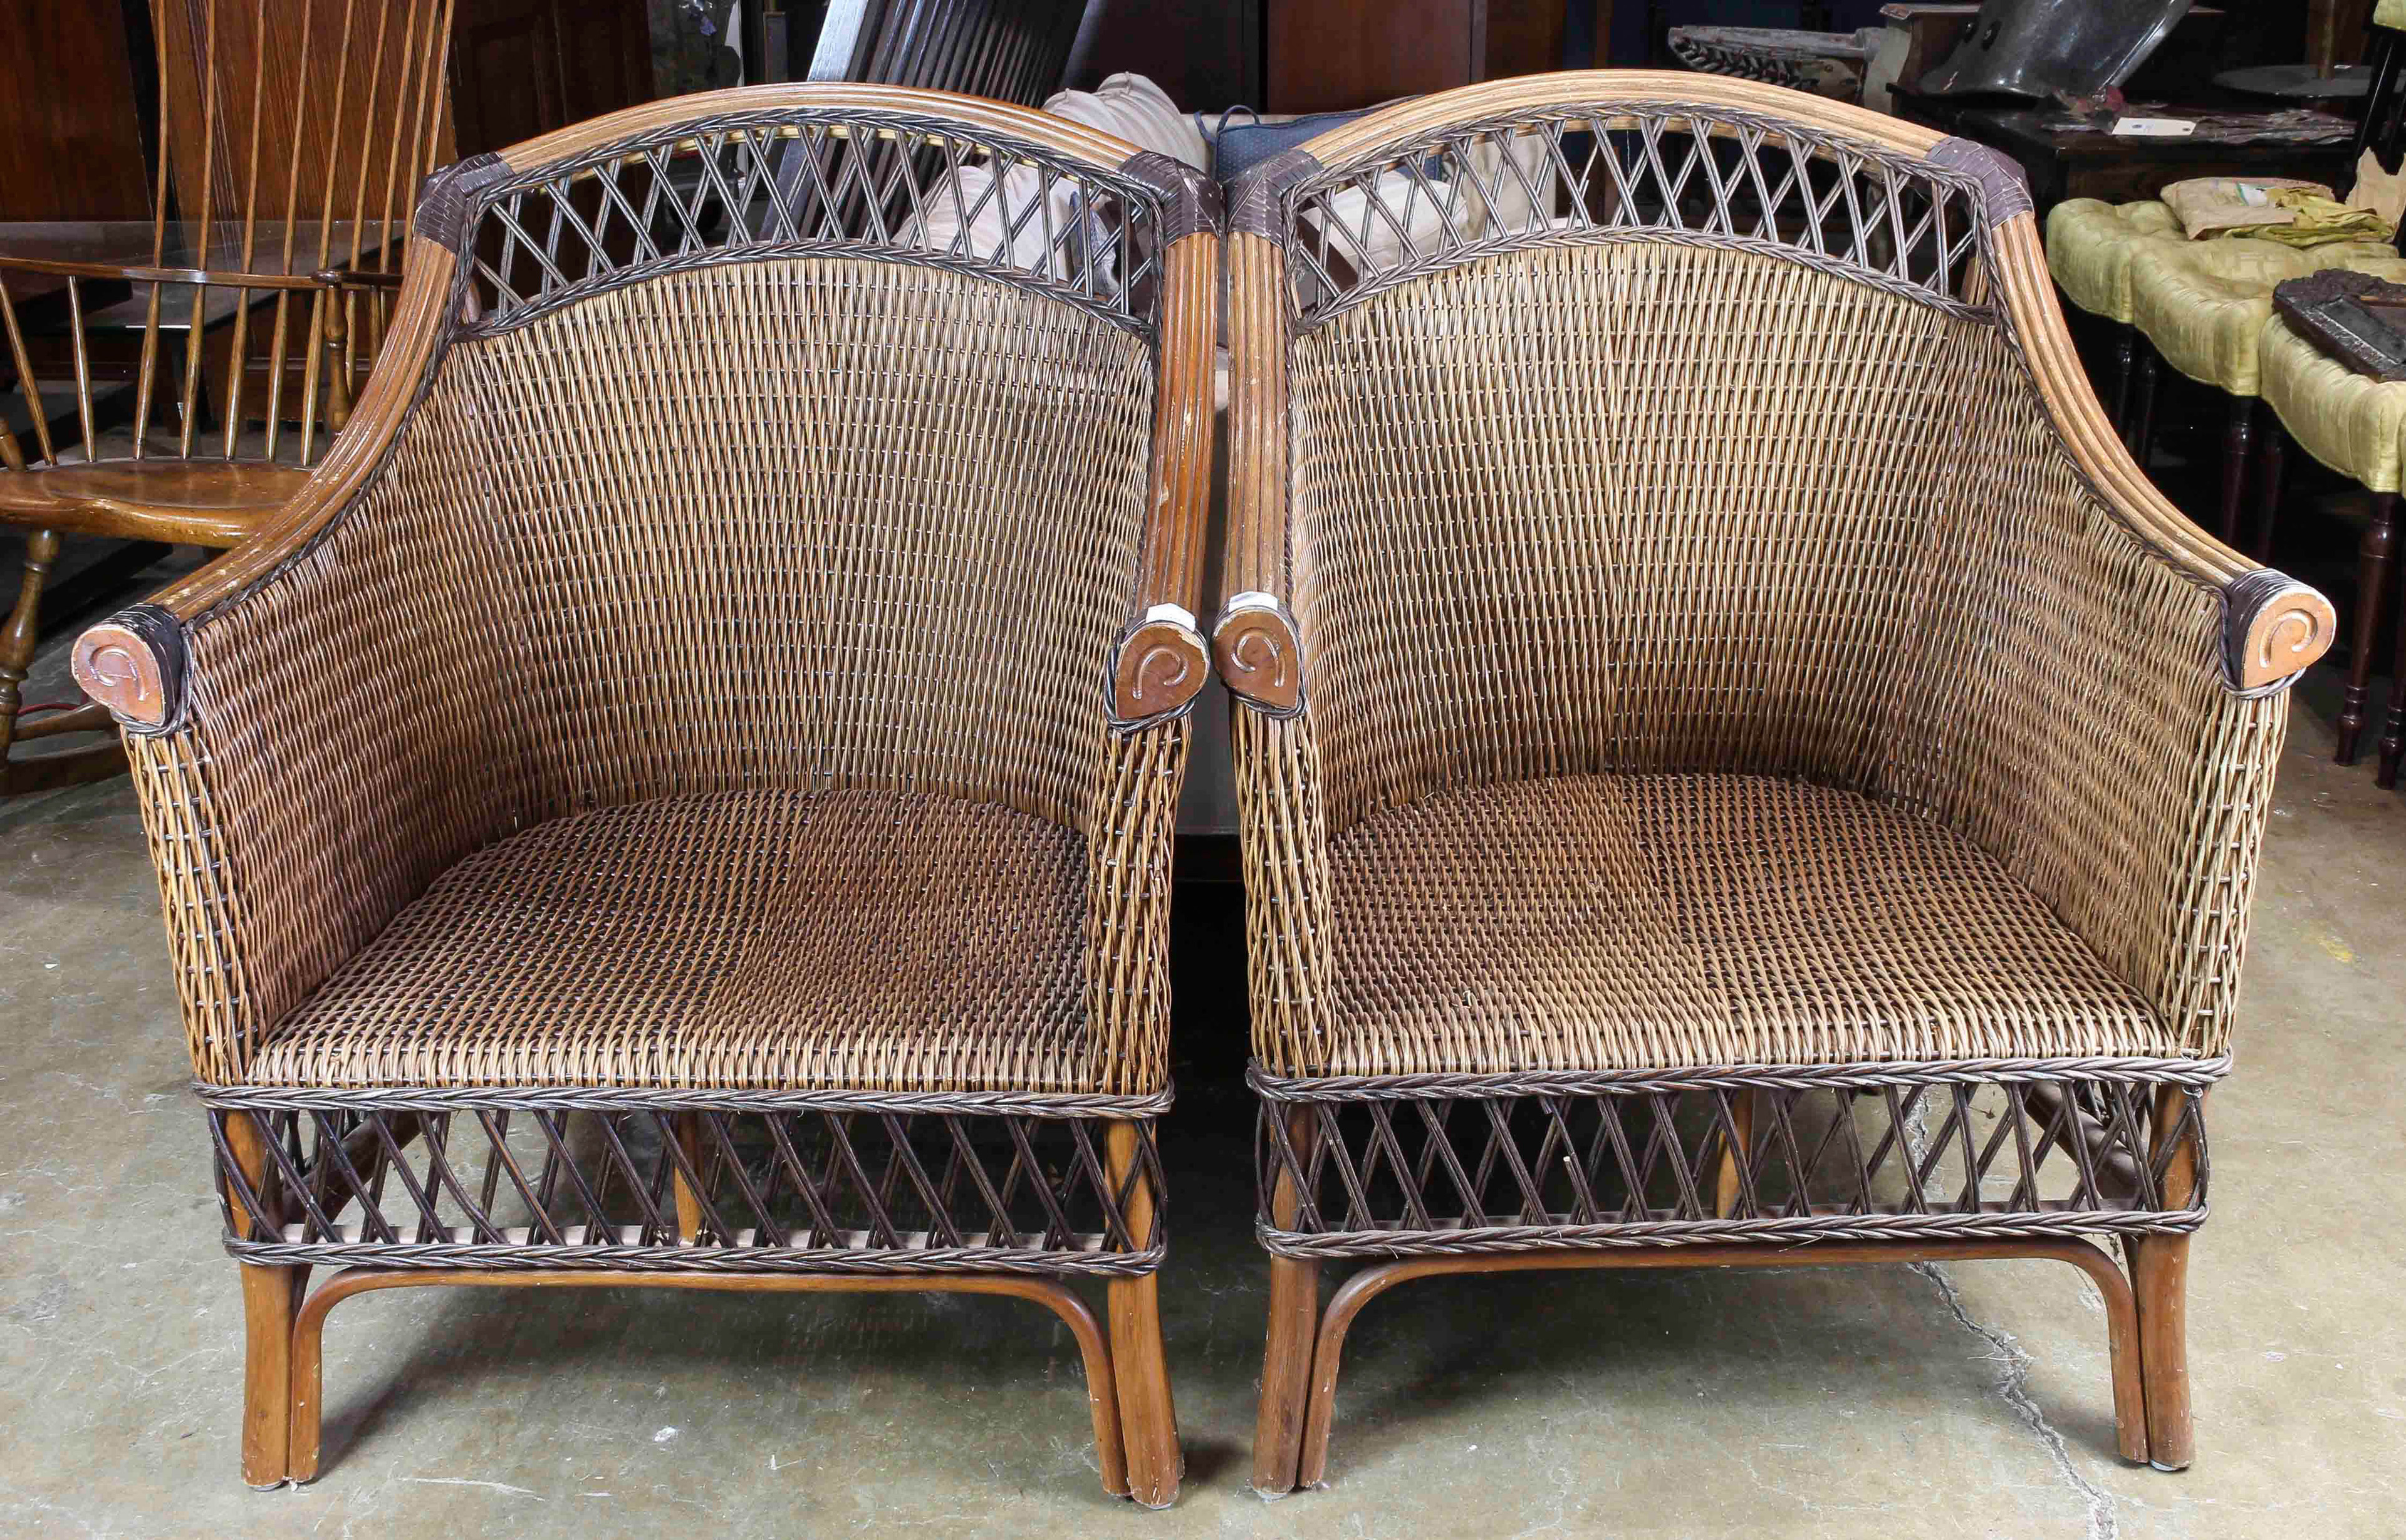 A PAIR OF WICKER ARM CHAIRS A pair of